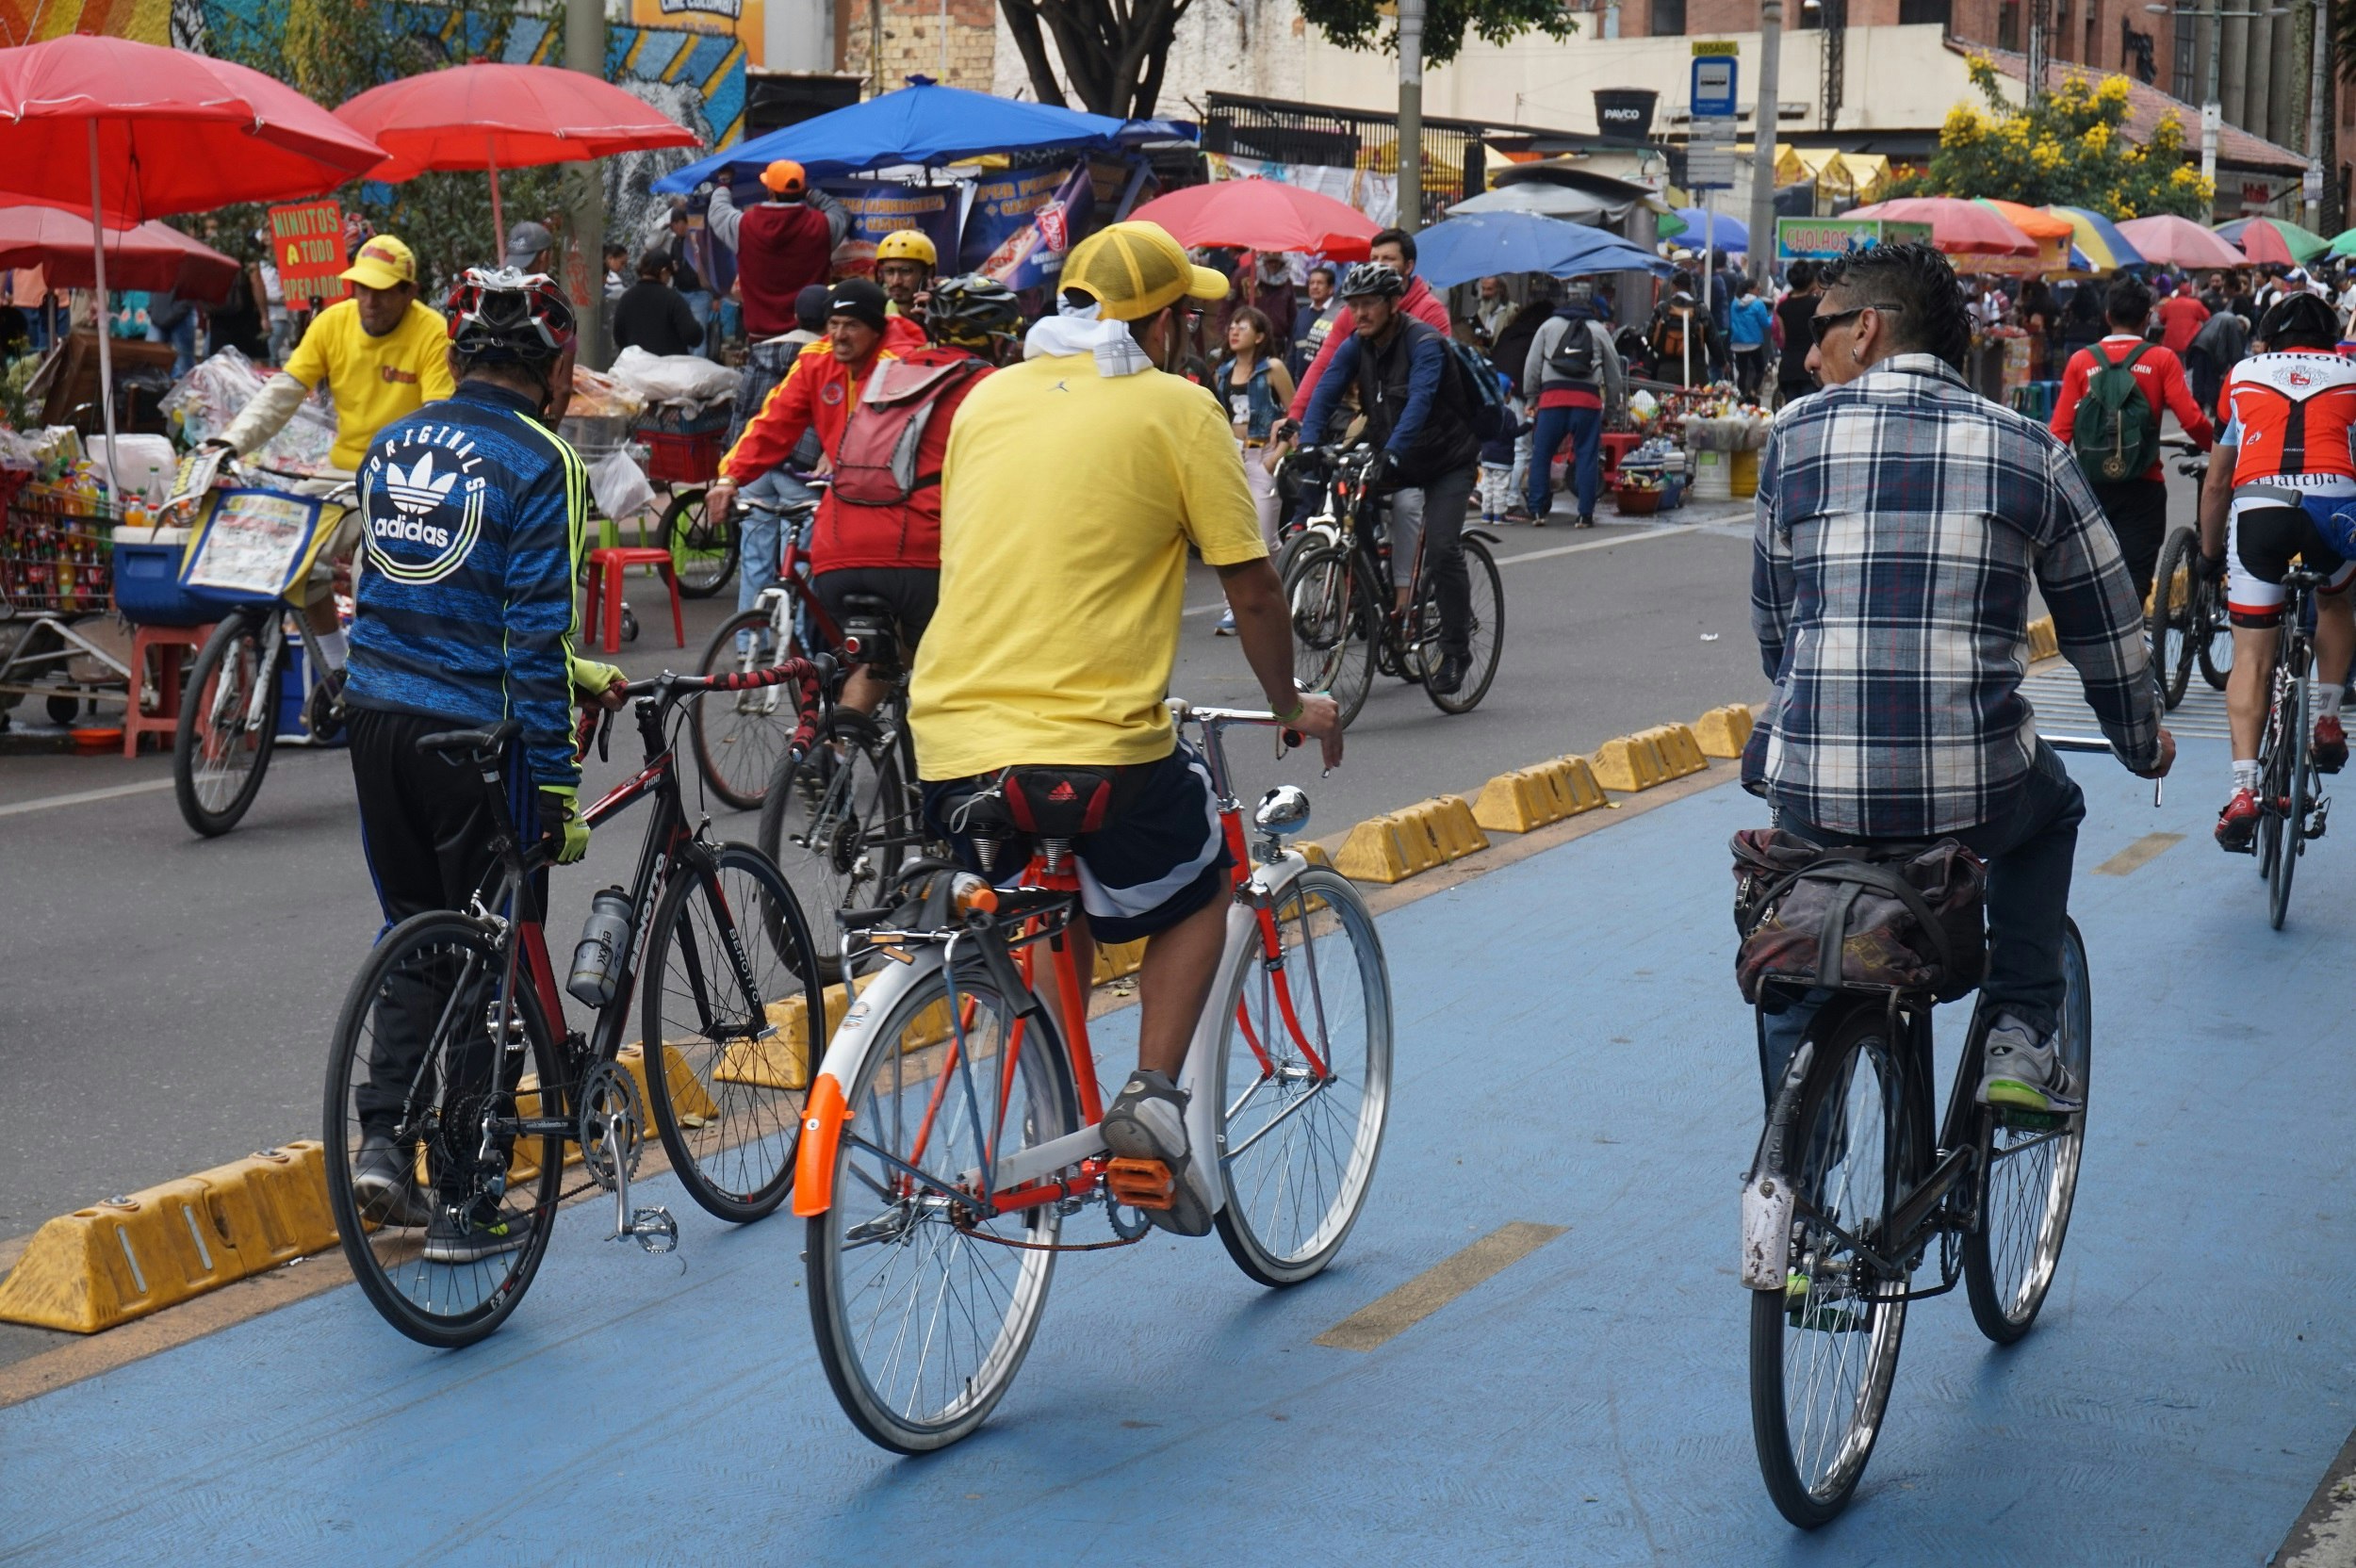 A street is filled with people on bicycles riding both directions; on the side of the street that is visible there are numerous vendors selling food.